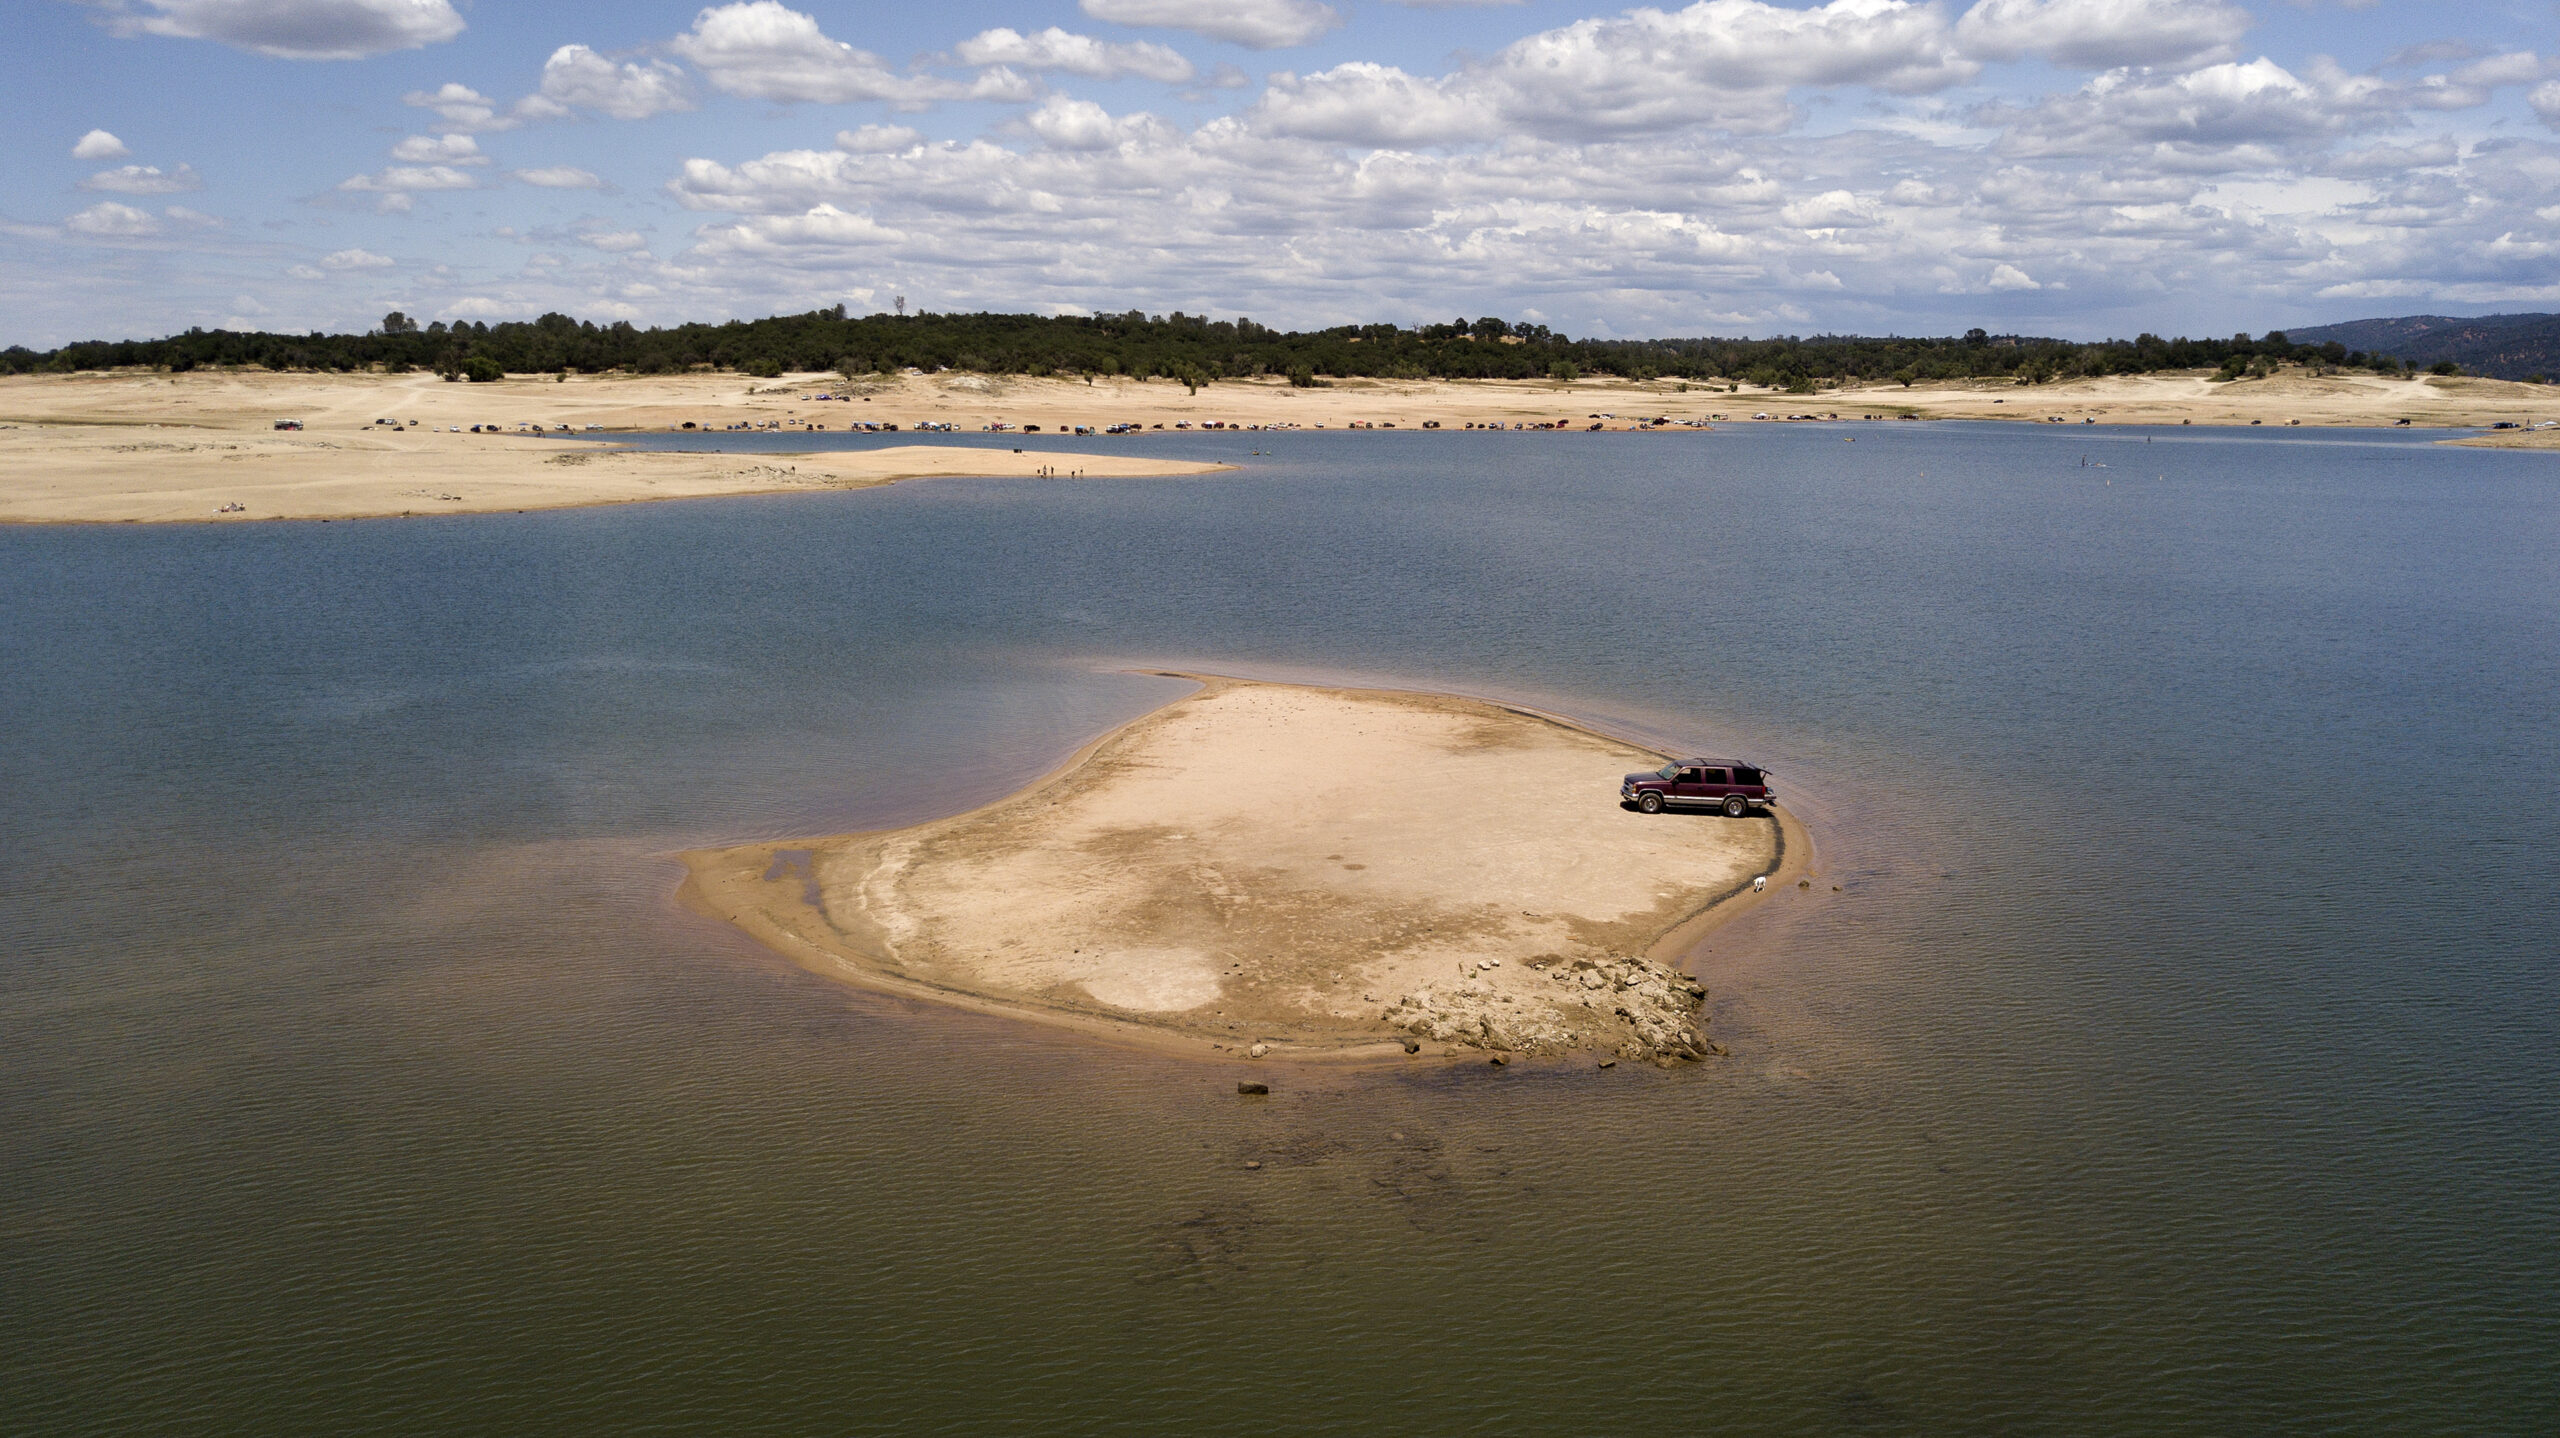 receding waters at the drought-stricken Folsom Lake, CA